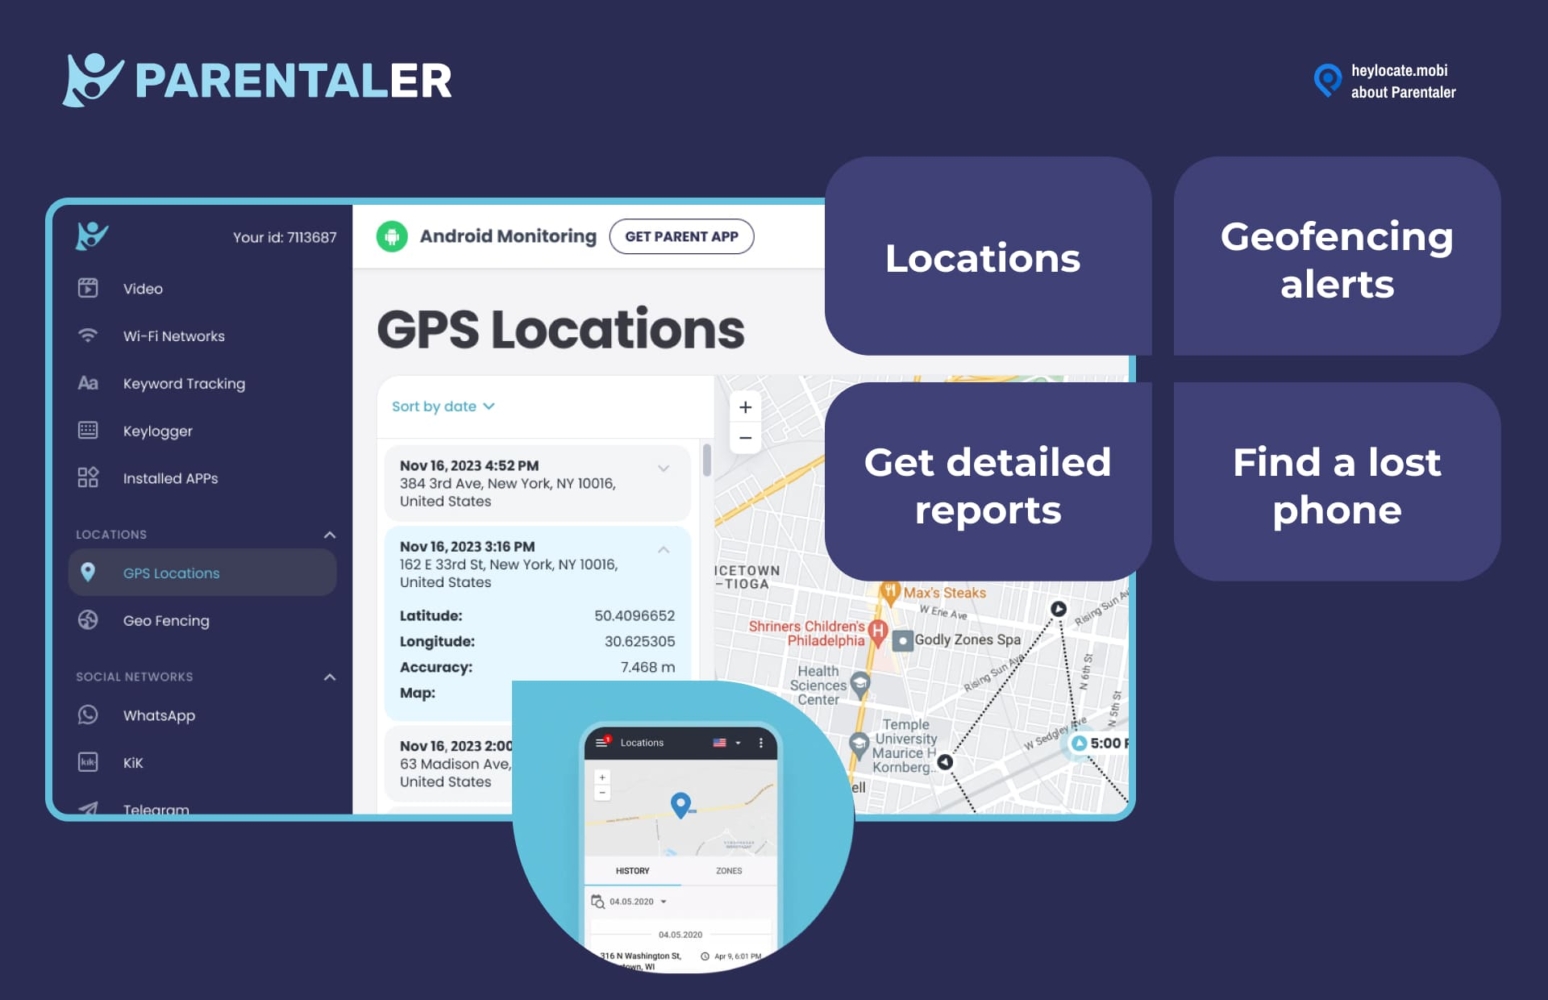 The Parentaler app's GPS tracking screen displaying a user's ID, Wi-Fi networks, keyword tracking, keylogger, installed apps, locations with GPS tracking and geo-fencing, and a map showing recent location pins for enhanced parental monitoring and security features such as geofencing alerts and phone location services.